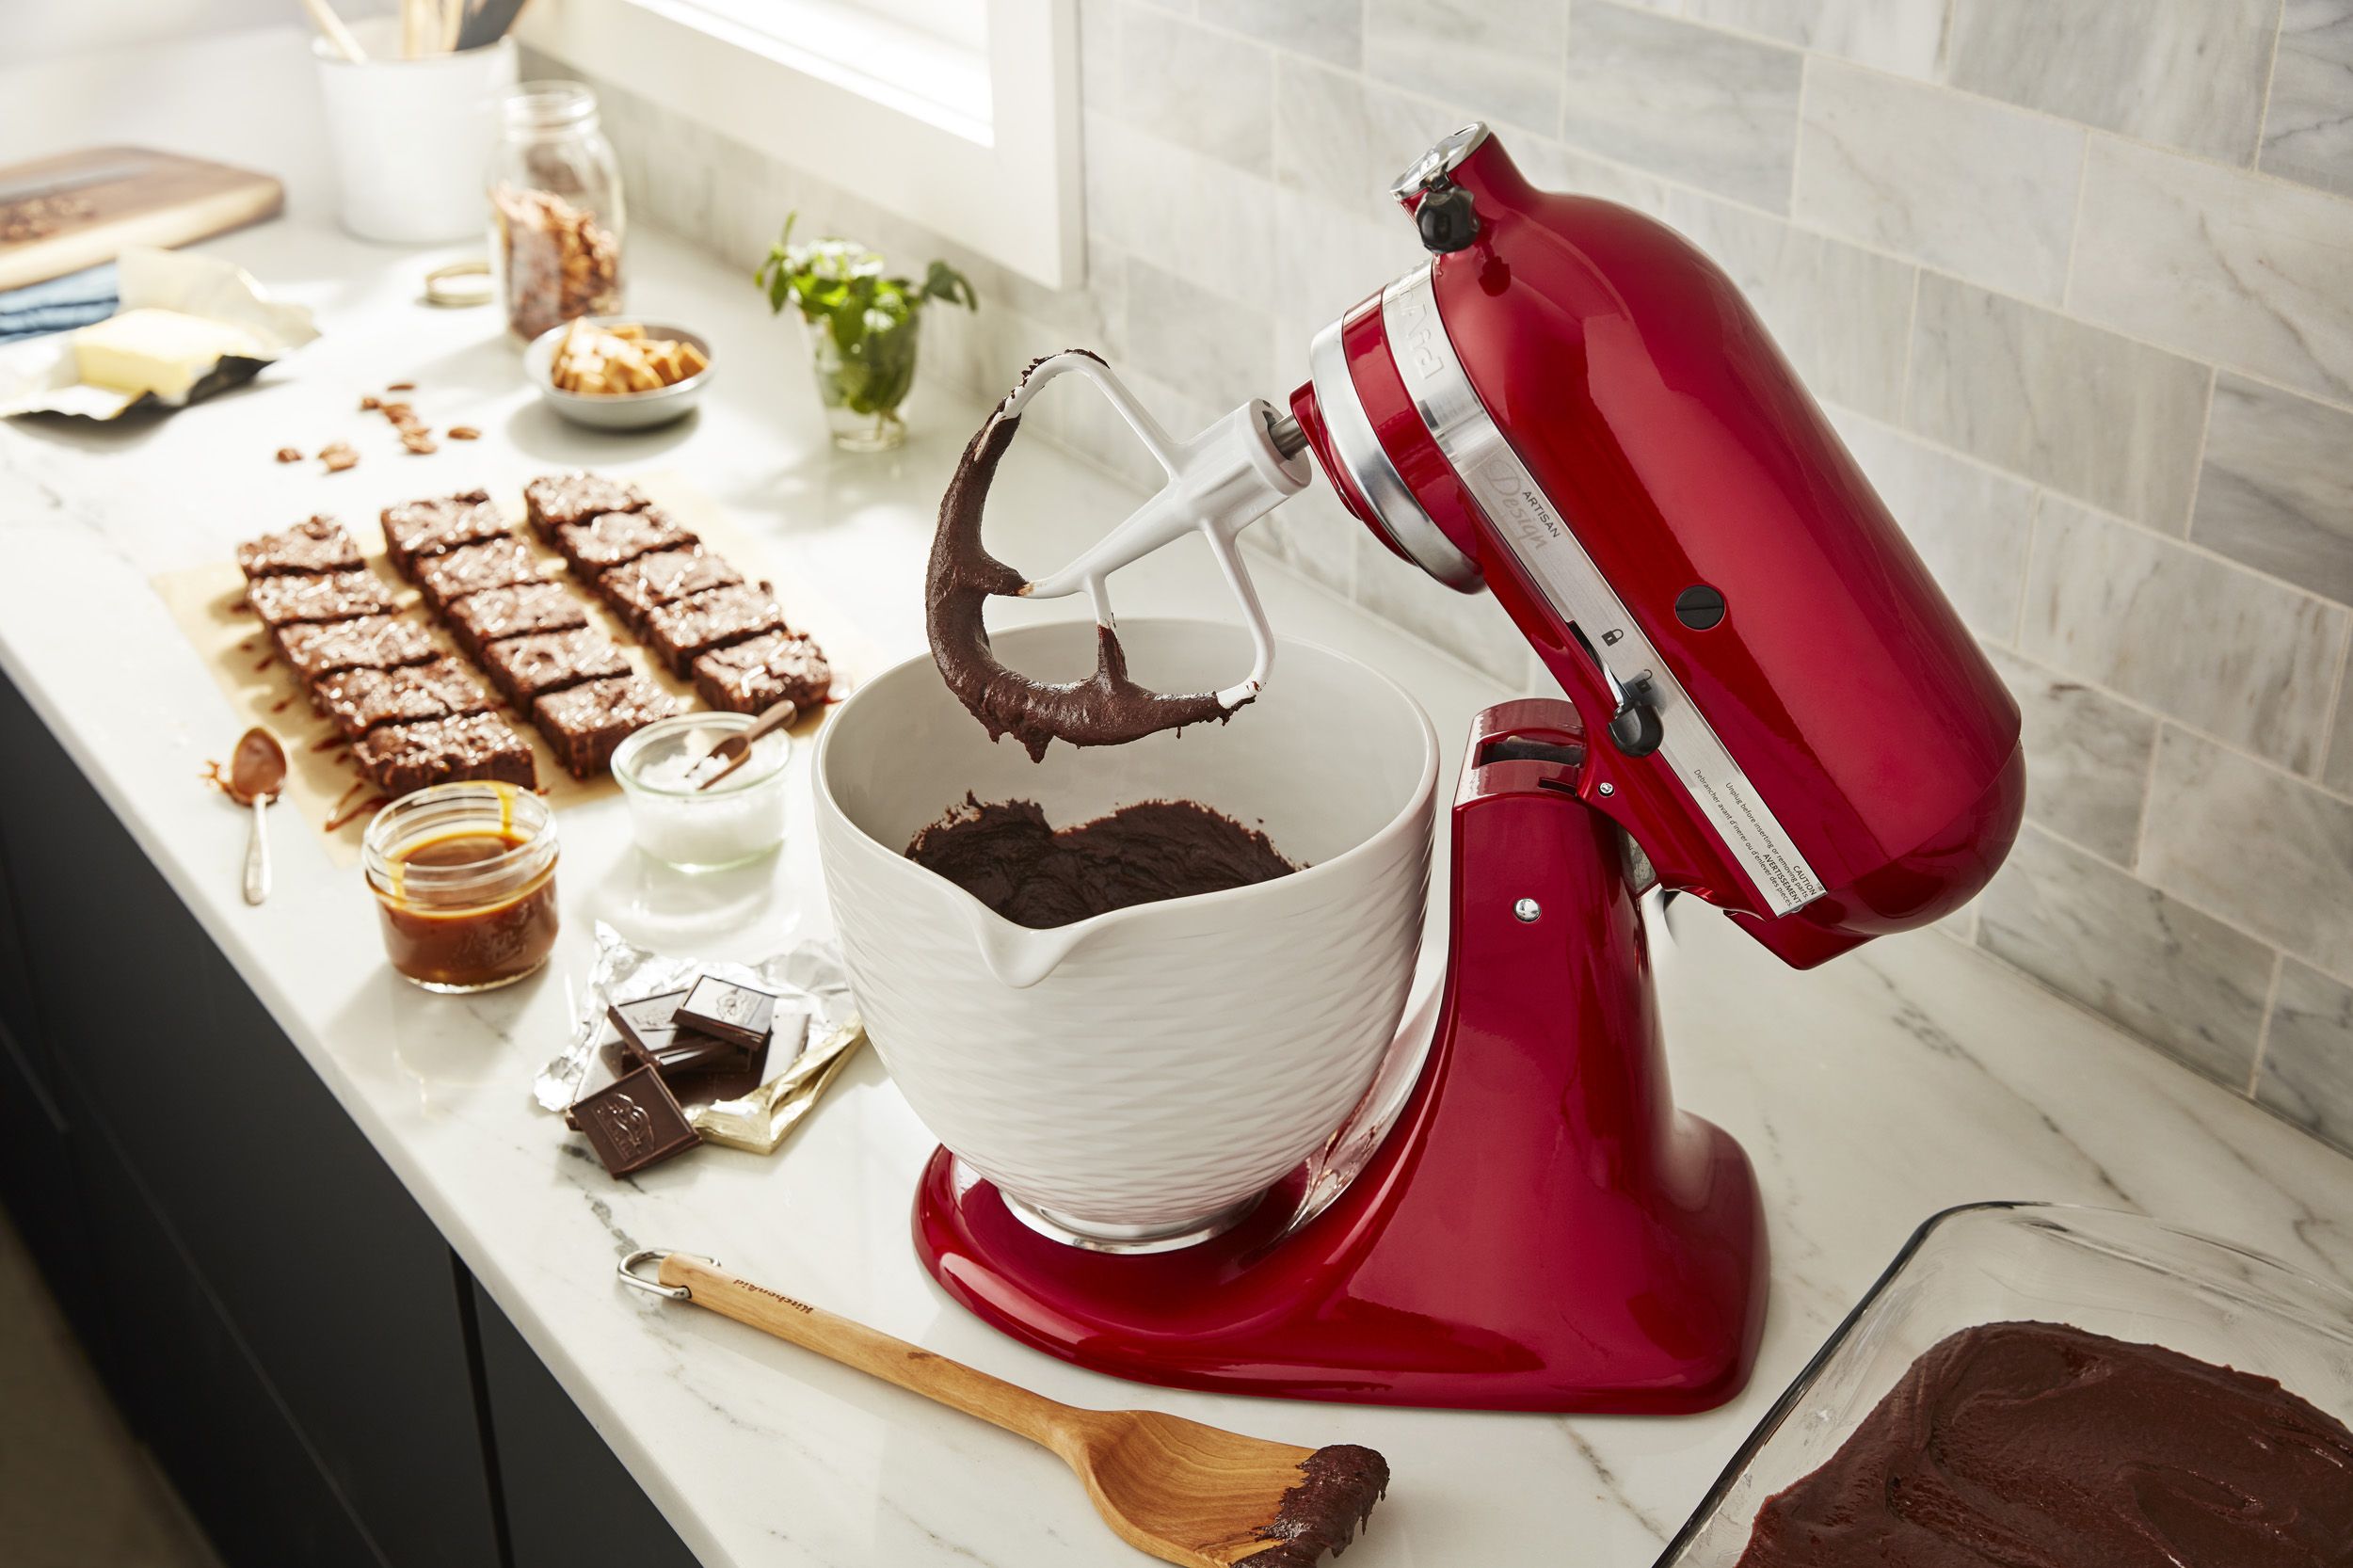 KitchenAid's Coming Out With Chic New Ways To Customize Your Stand Mixer